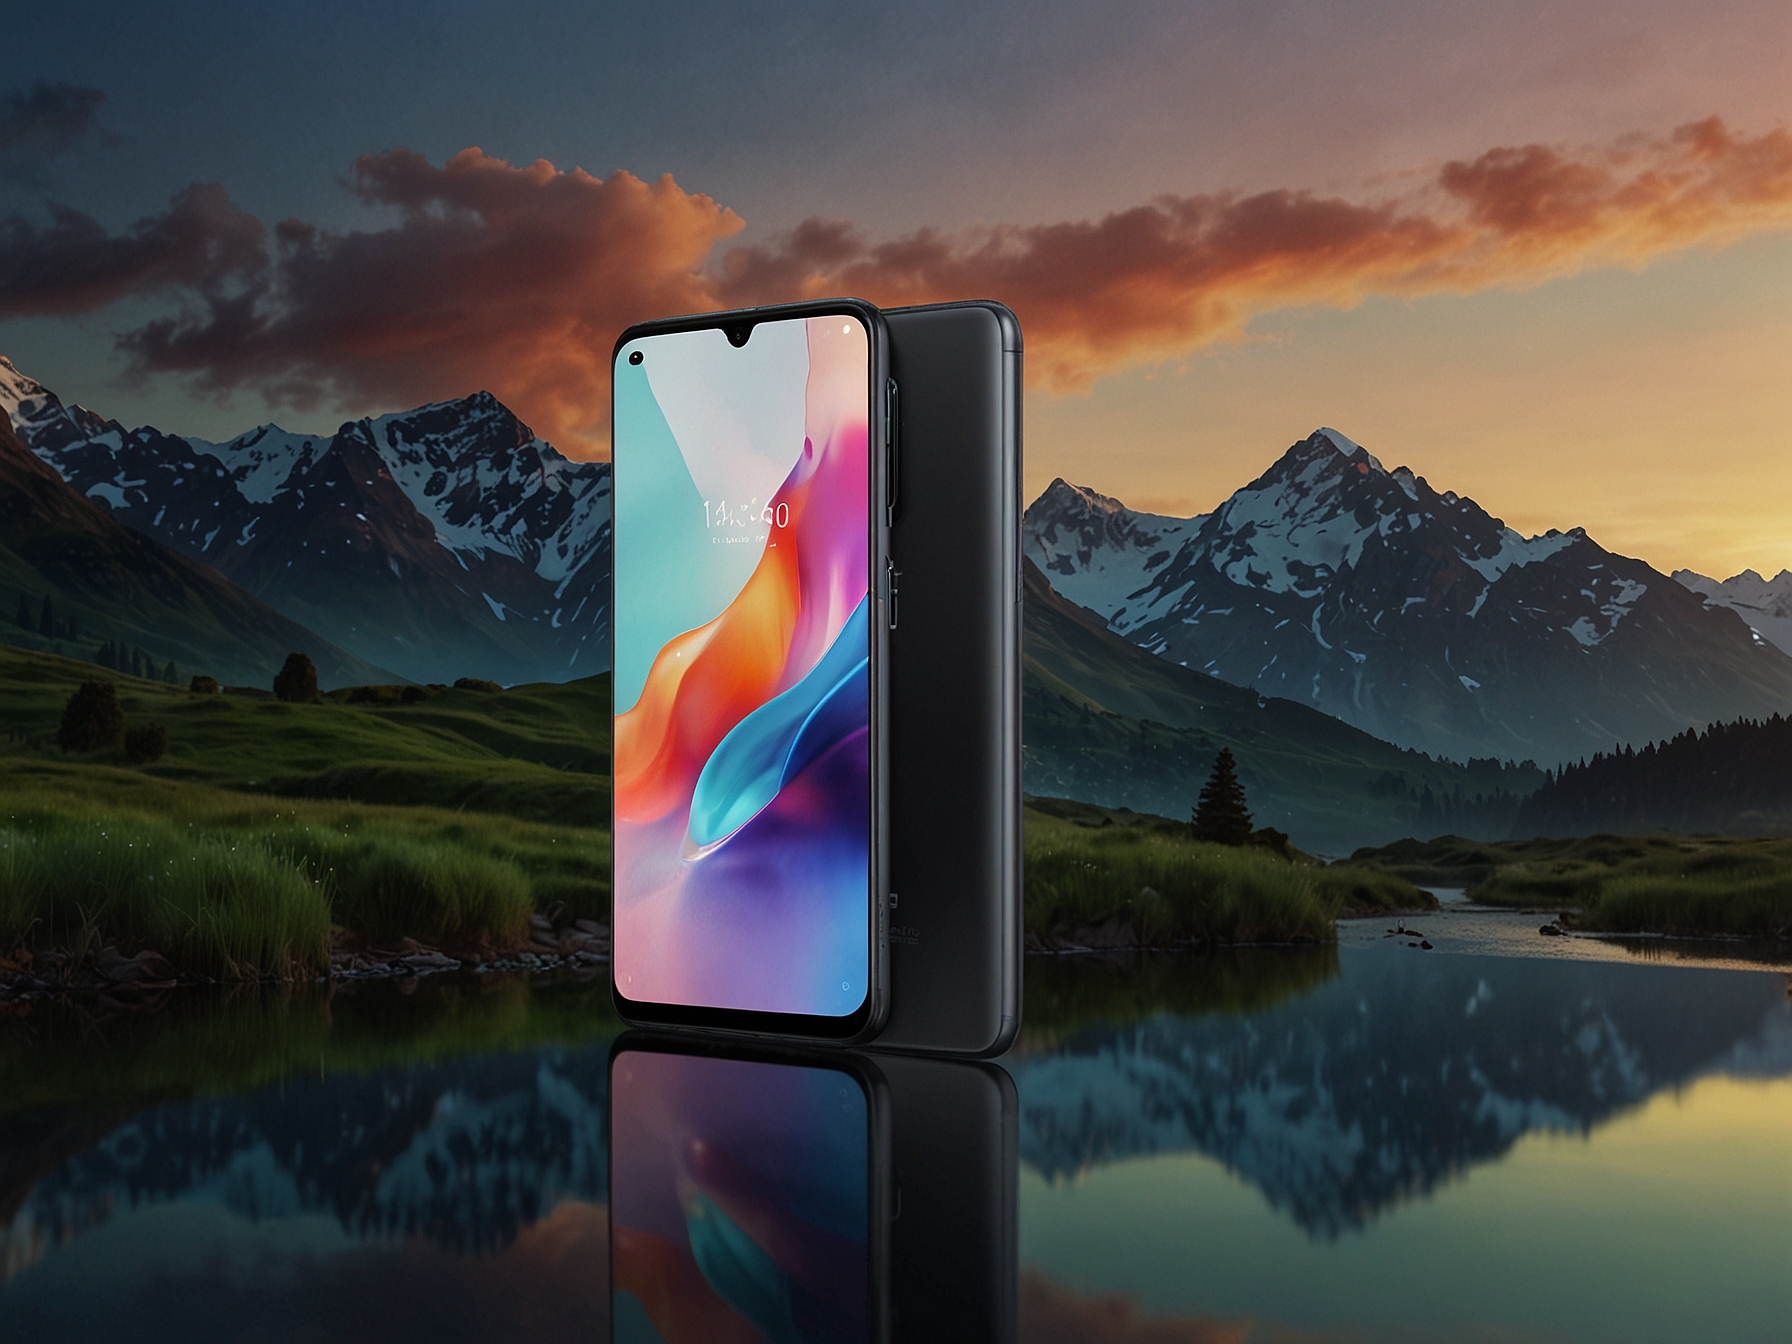 Promotional image of the OnePlus Nord CE 4 Lite 5G showcasing its large 6.59-inch Full HD+ display, promising vibrant and sharp visuals ideal for gaming and streaming.